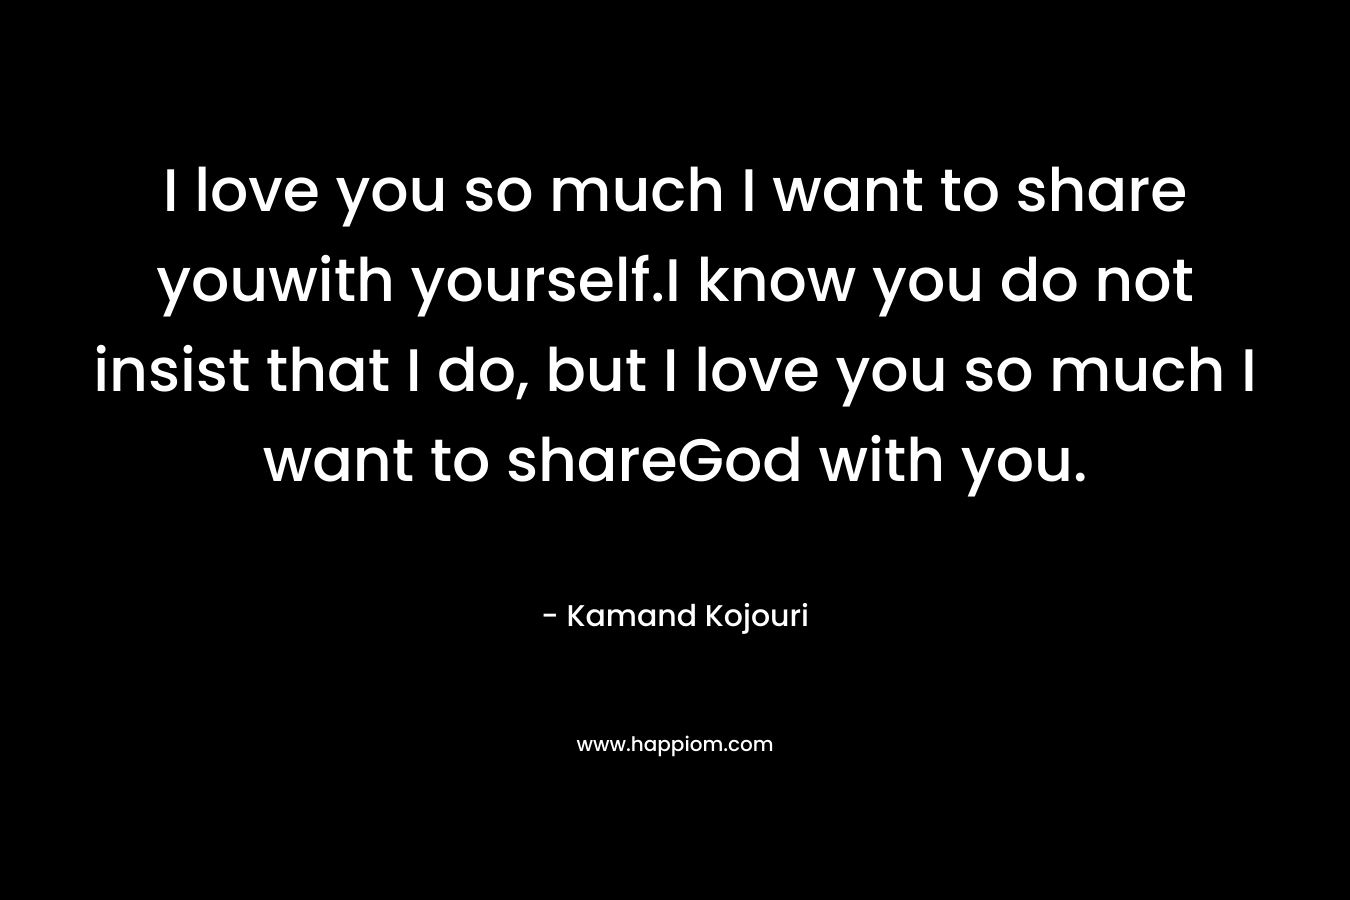 I love you so much I want to share youwith yourself.I know you do not insist that I do, but I love you so much I want to shareGod with you.